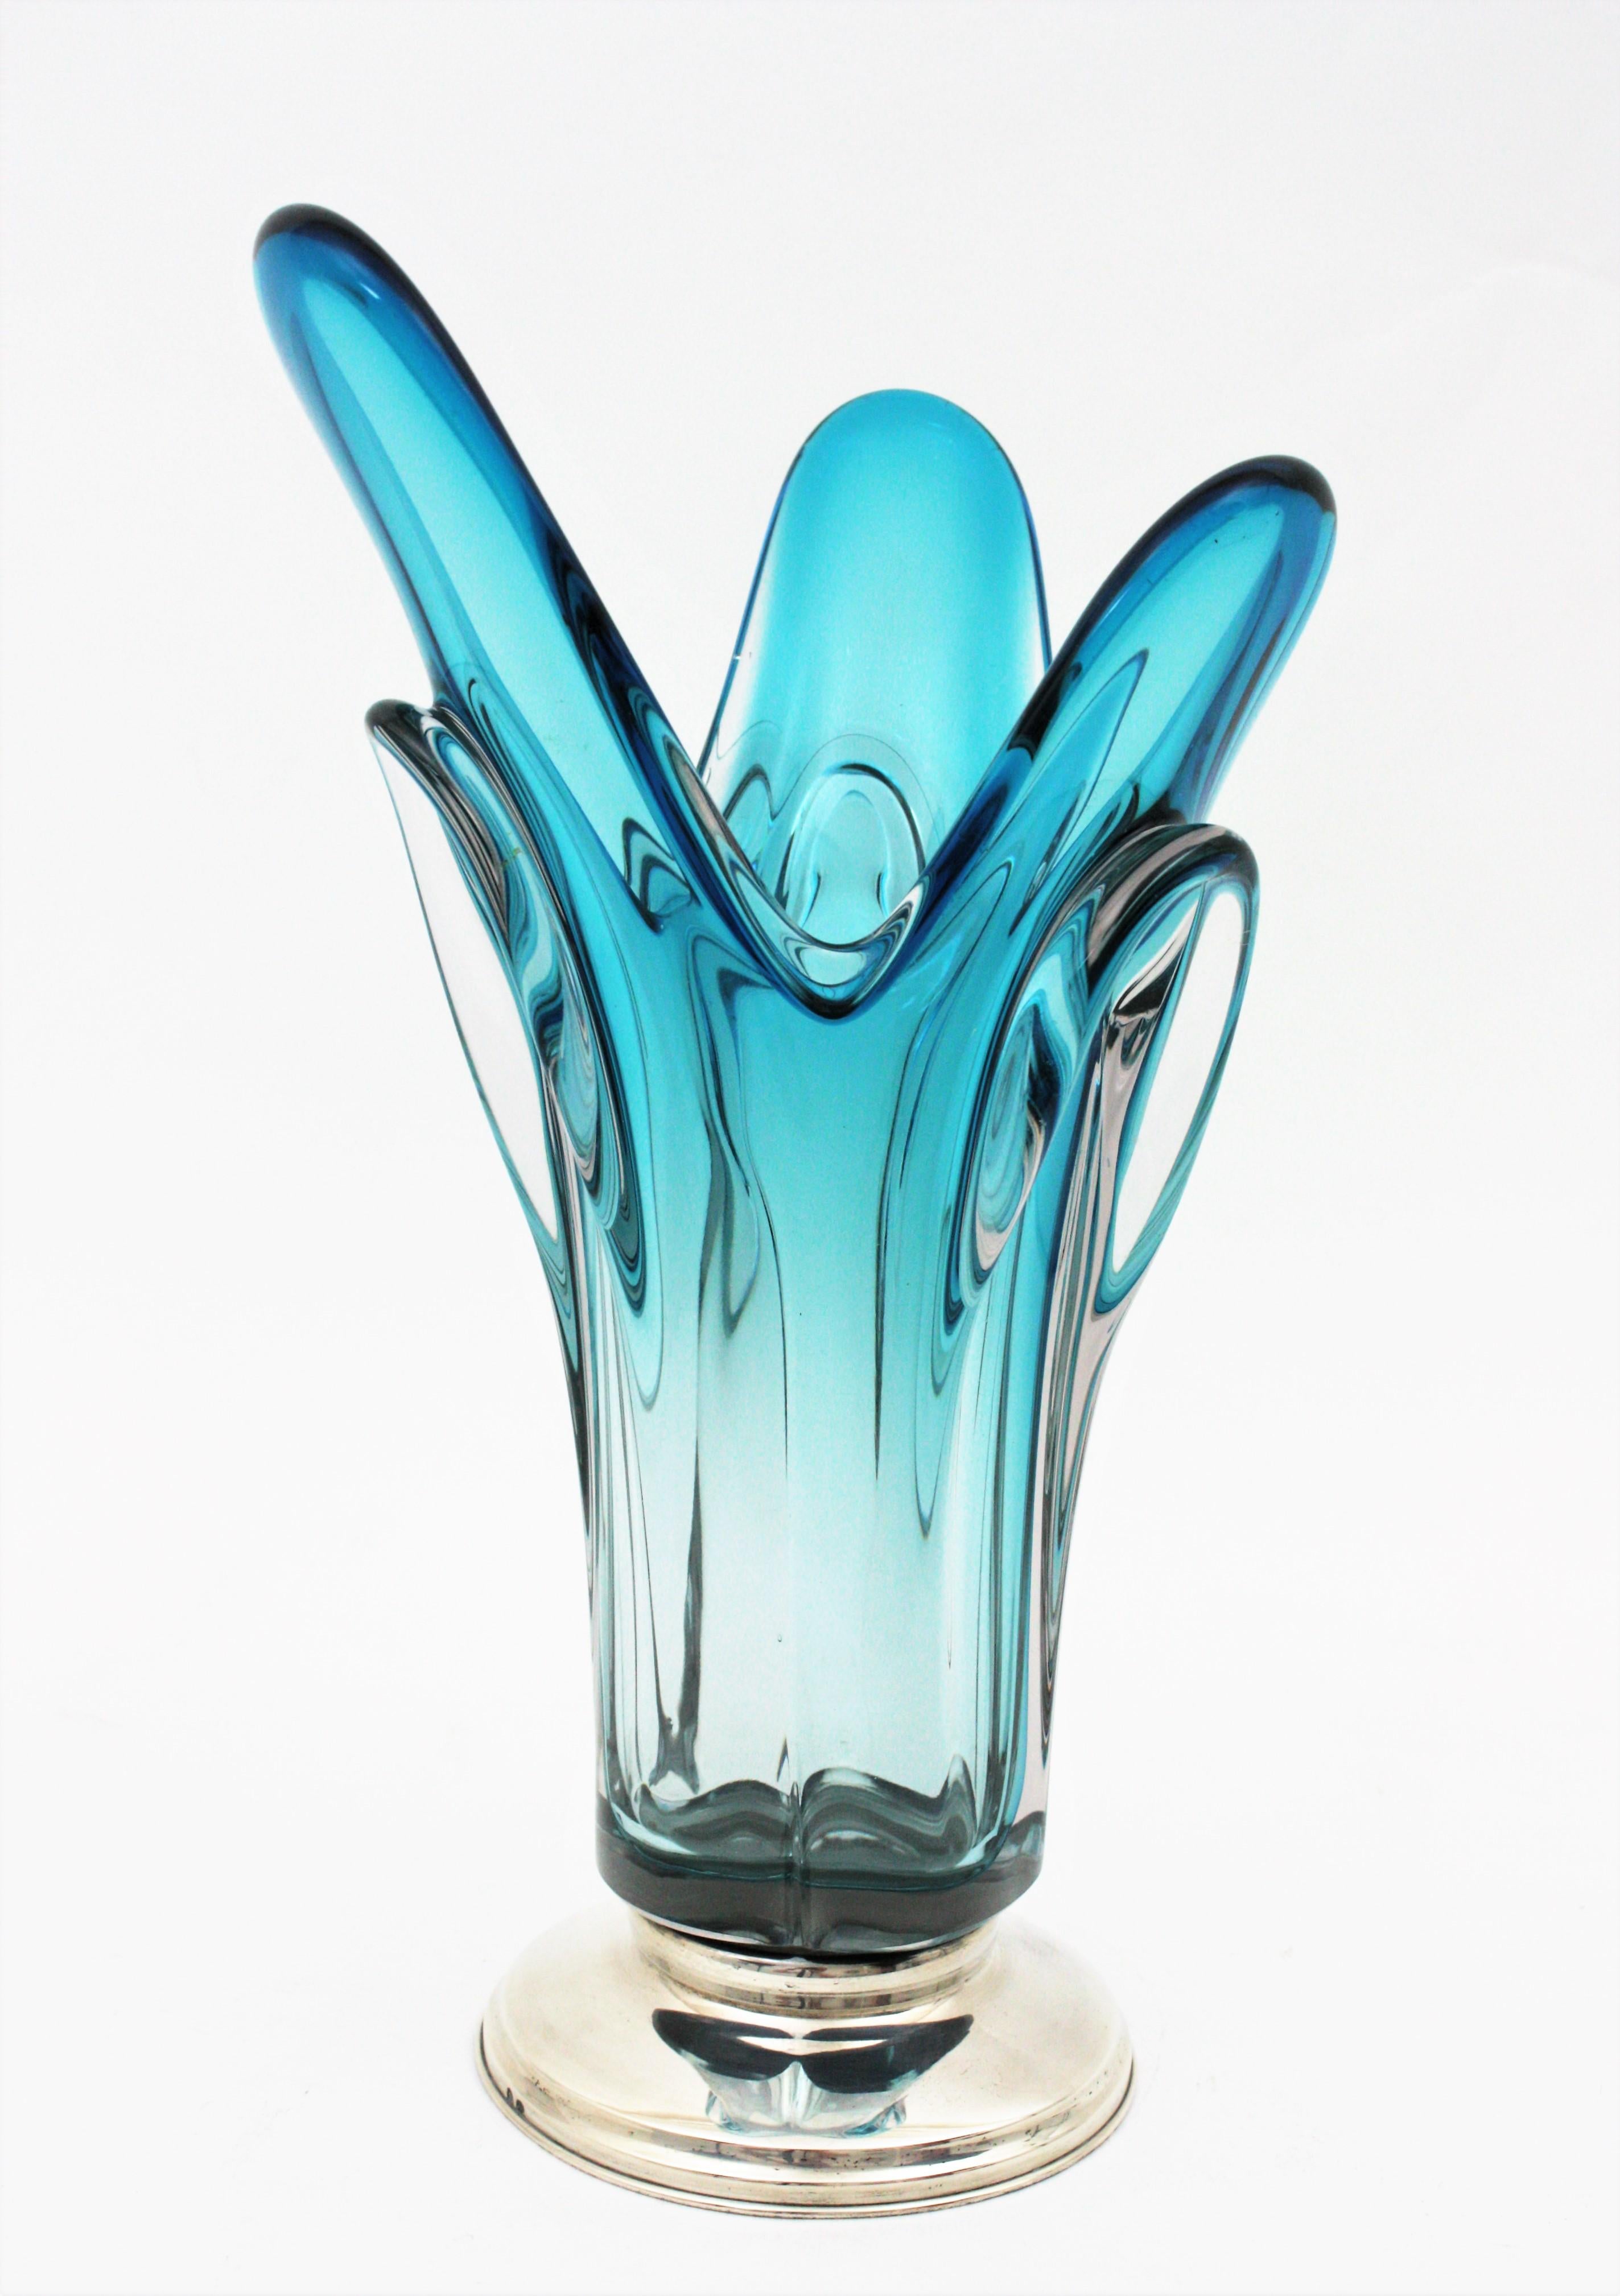 Hand blown Sommerso blue and clear Italian art glass vase on Sterling Silver base. Attributed to Seguso, Italy, 1950s.
This eye-catching and colorful pulled centerpiece vase stands up on a silver base. It has a beautiful design with pulled details